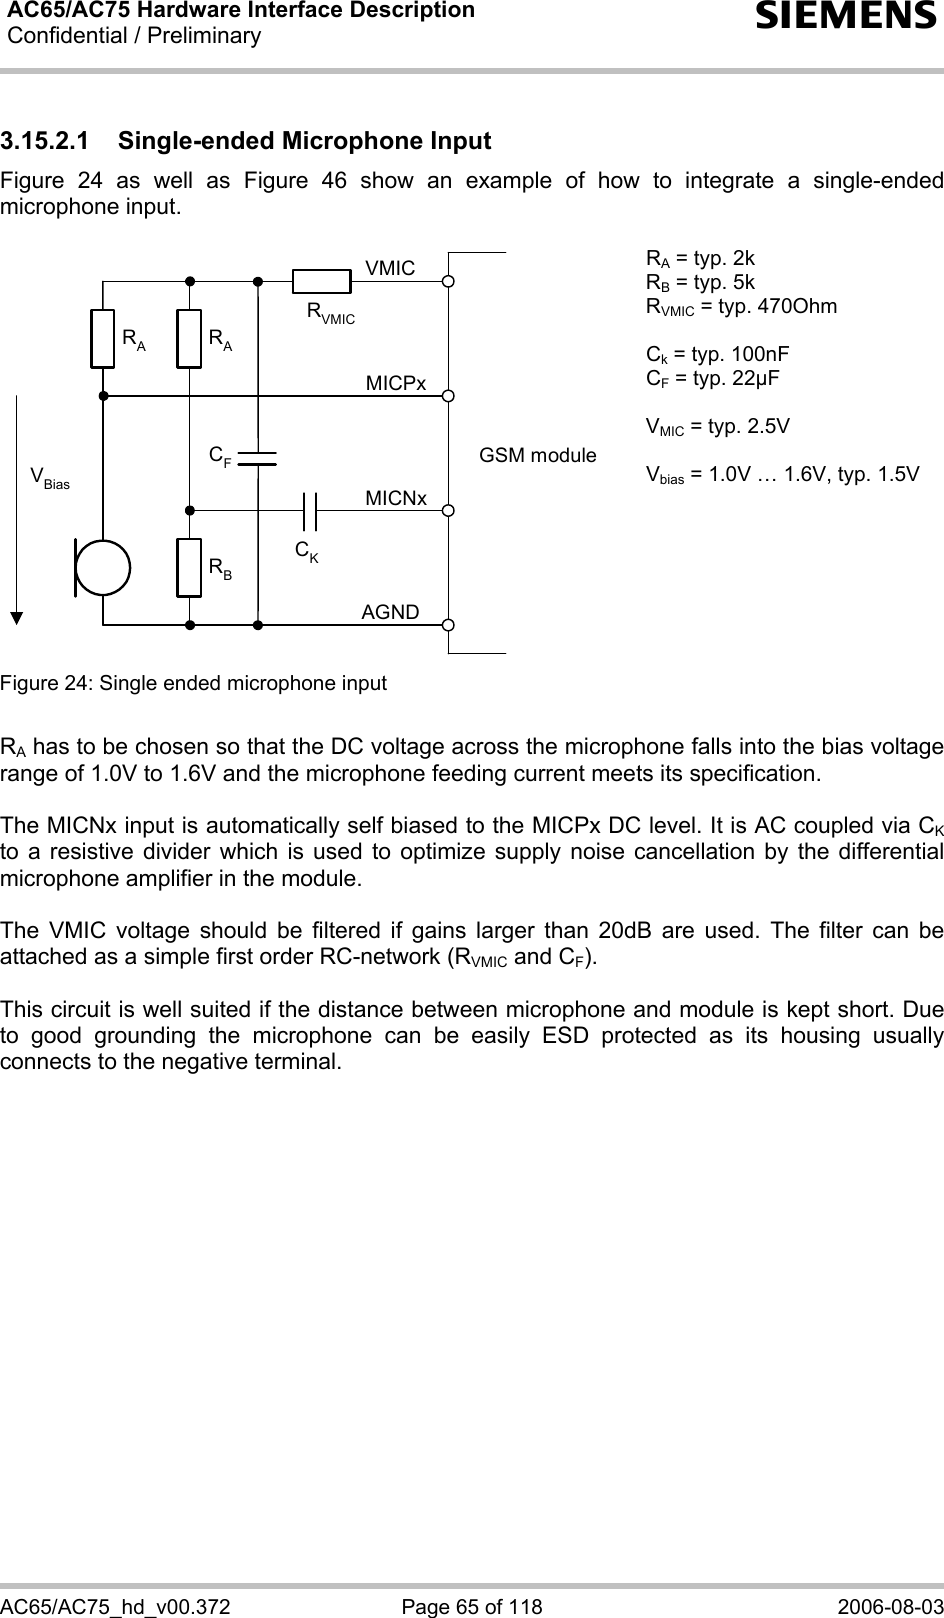 AC65/AC75 Hardware Interface Description Confidential / Preliminary   s AC65/AC75_hd_v00.372  Page 65 of 118  2006-08-03 3.15.2.1 Single-ended Microphone Input Figure 24 as well as Figure 46 show an example of how to integrate a single-ended microphone input.   GSM moduleRBVBiasCKAGNDMICNxMICPxVMICRARACFRVMICRA = typ. 2k RB = typ. 5k RVMIC = typ. 470Ohm  Ck = typ. 100nF CF = typ. 22µF  VMIC = typ. 2.5V  Vbias = 1.0V … 1.6V, typ. 1.5V Figure 24: Single ended microphone input    RA has to be chosen so that the DC voltage across the microphone falls into the bias voltage range of 1.0V to 1.6V and the microphone feeding current meets its specification.  The MICNx input is automatically self biased to the MICPx DC level. It is AC coupled via CK to a resistive divider which is used to optimize supply noise cancellation by the differential microphone amplifier in the module.   The VMIC voltage should be filtered if gains larger than 20dB are used. The filter can be attached as a simple first order RC-network (RVMIC and CF).  This circuit is well suited if the distance between microphone and module is kept short. Due to good grounding the microphone can be easily ESD protected as its housing usually connects to the negative terminal.     